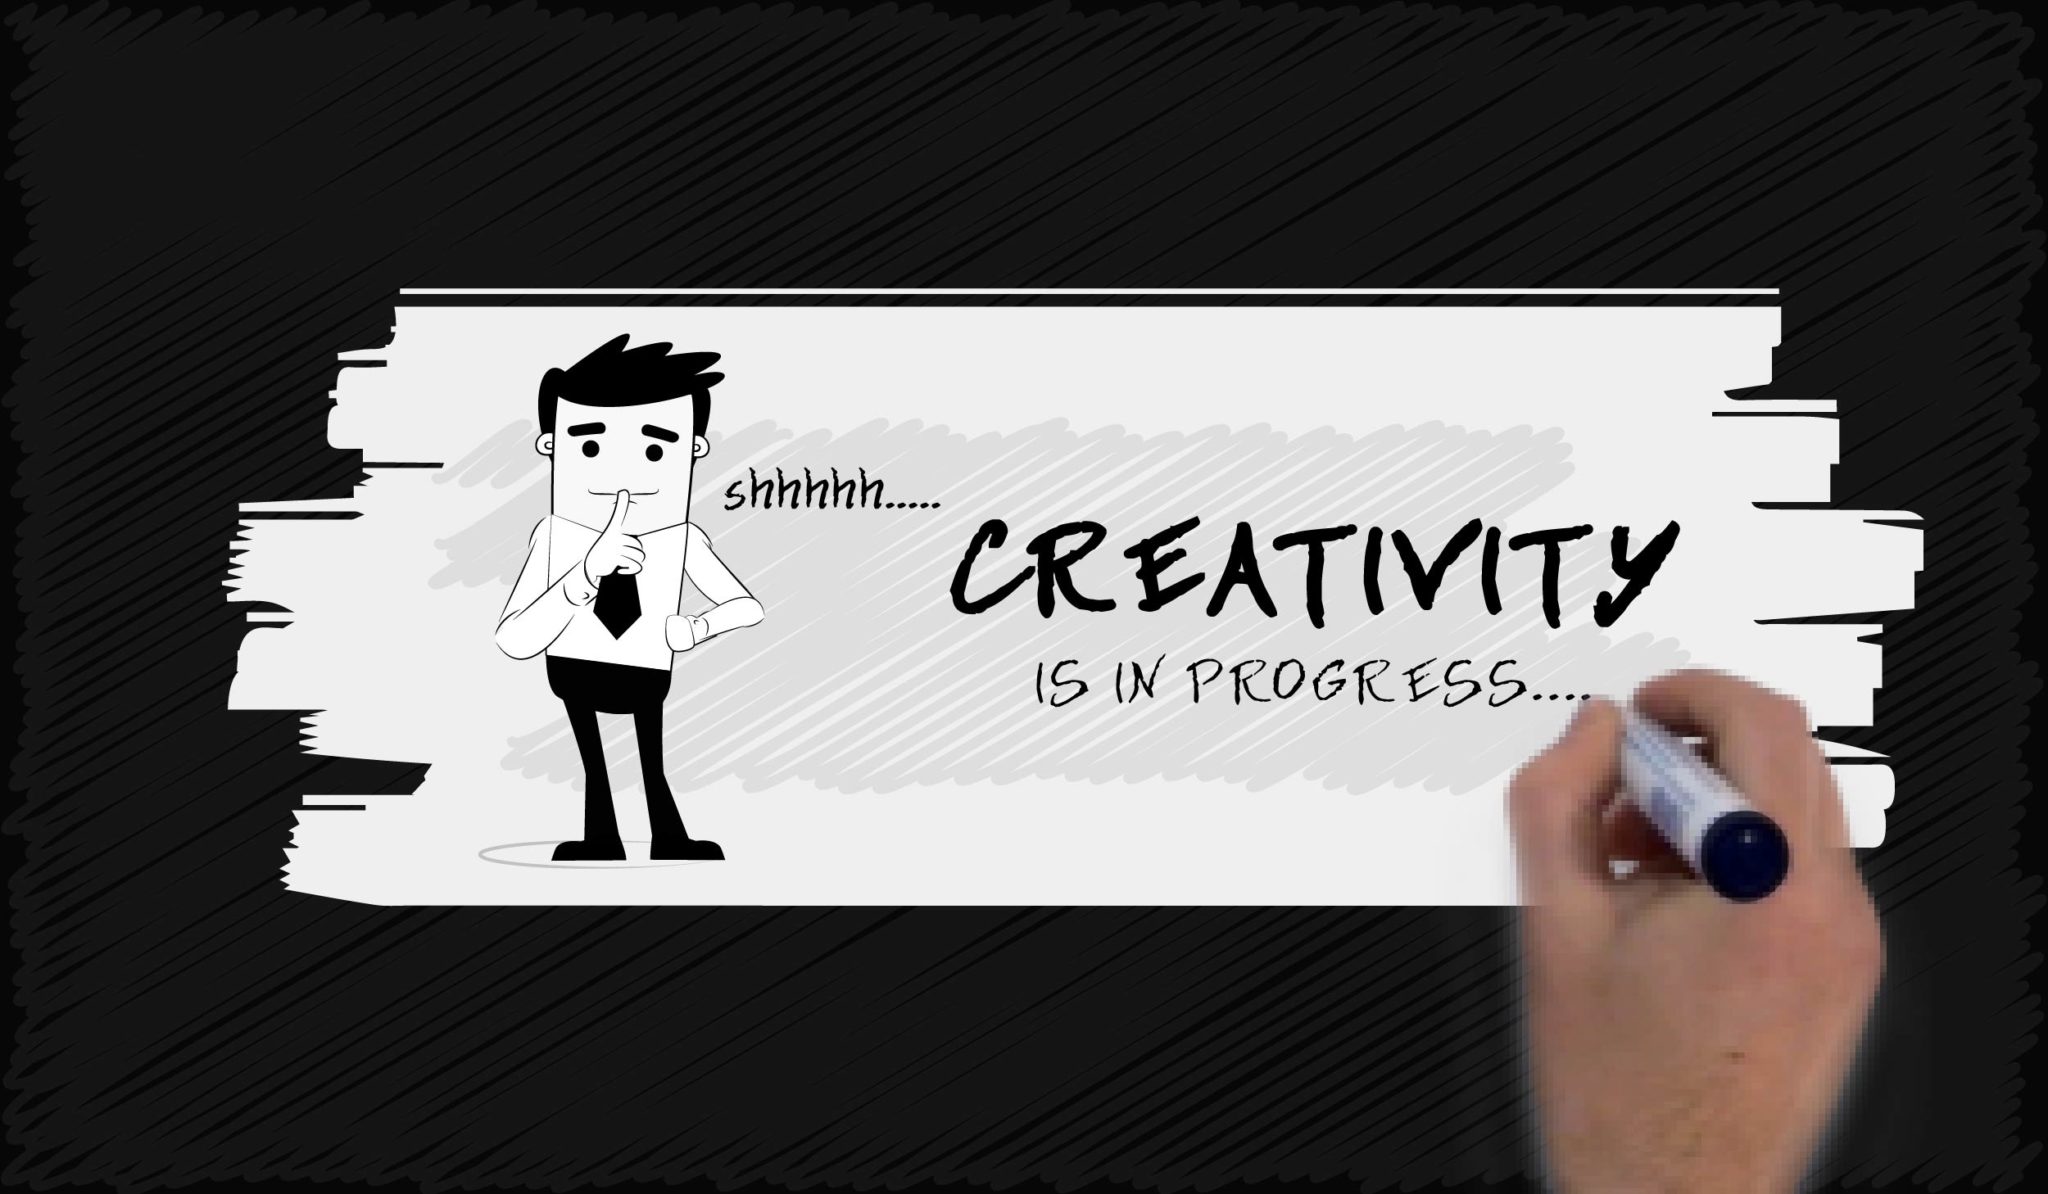 whiteboard animation videos makes informative simpler and attractive